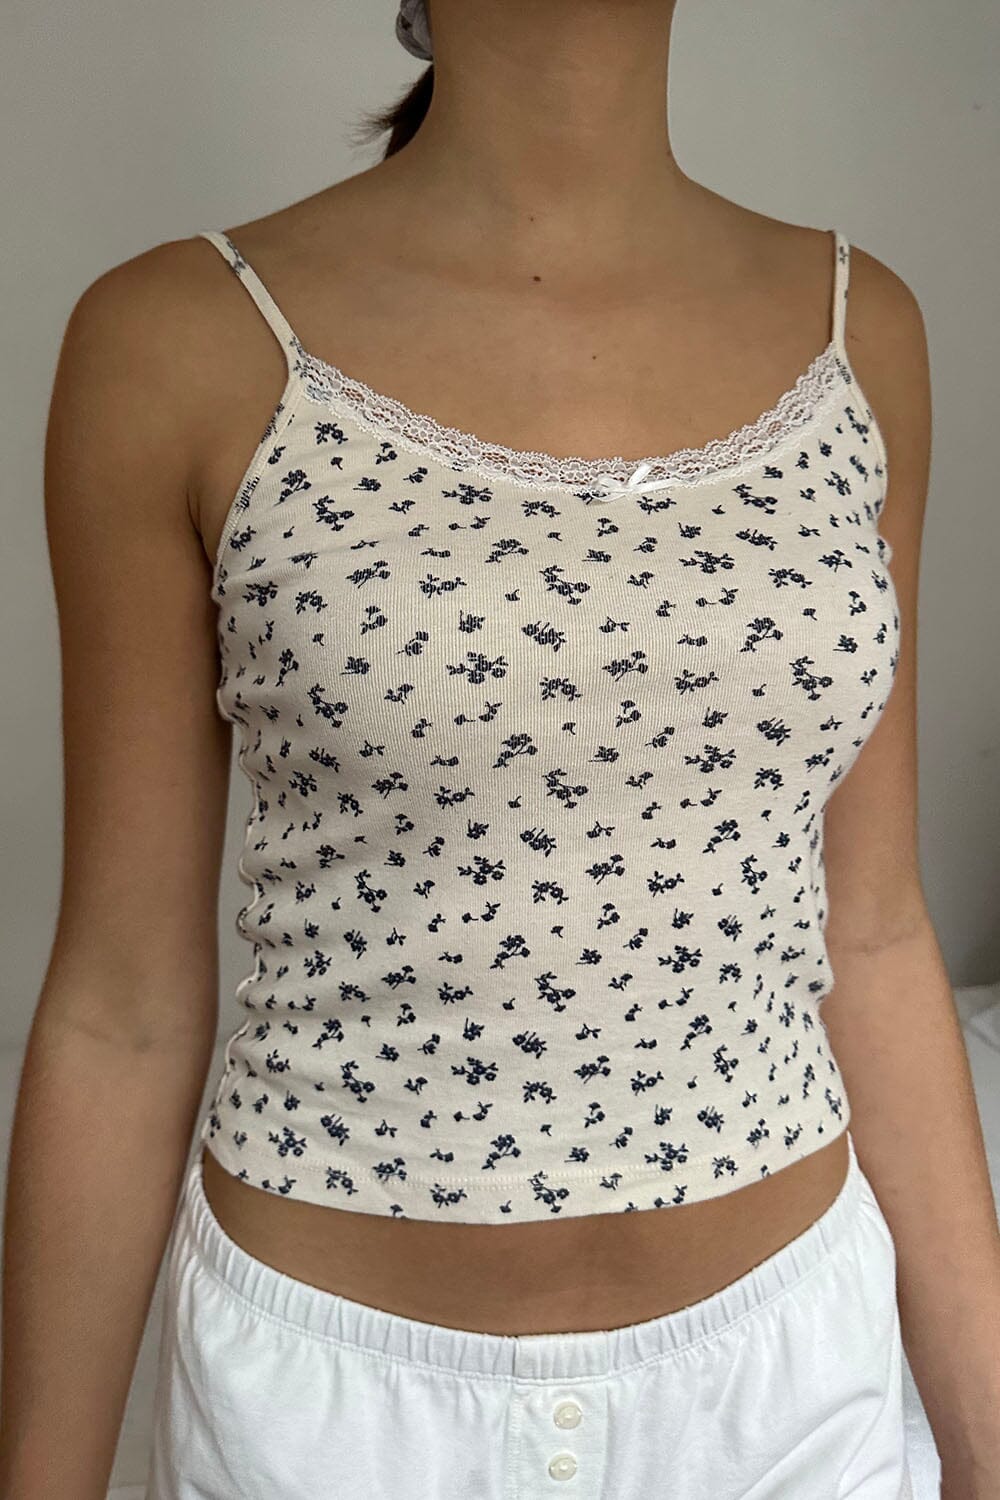 Brandy Melville Blue Lace Tank Top Size undefined - $13 - From Claire